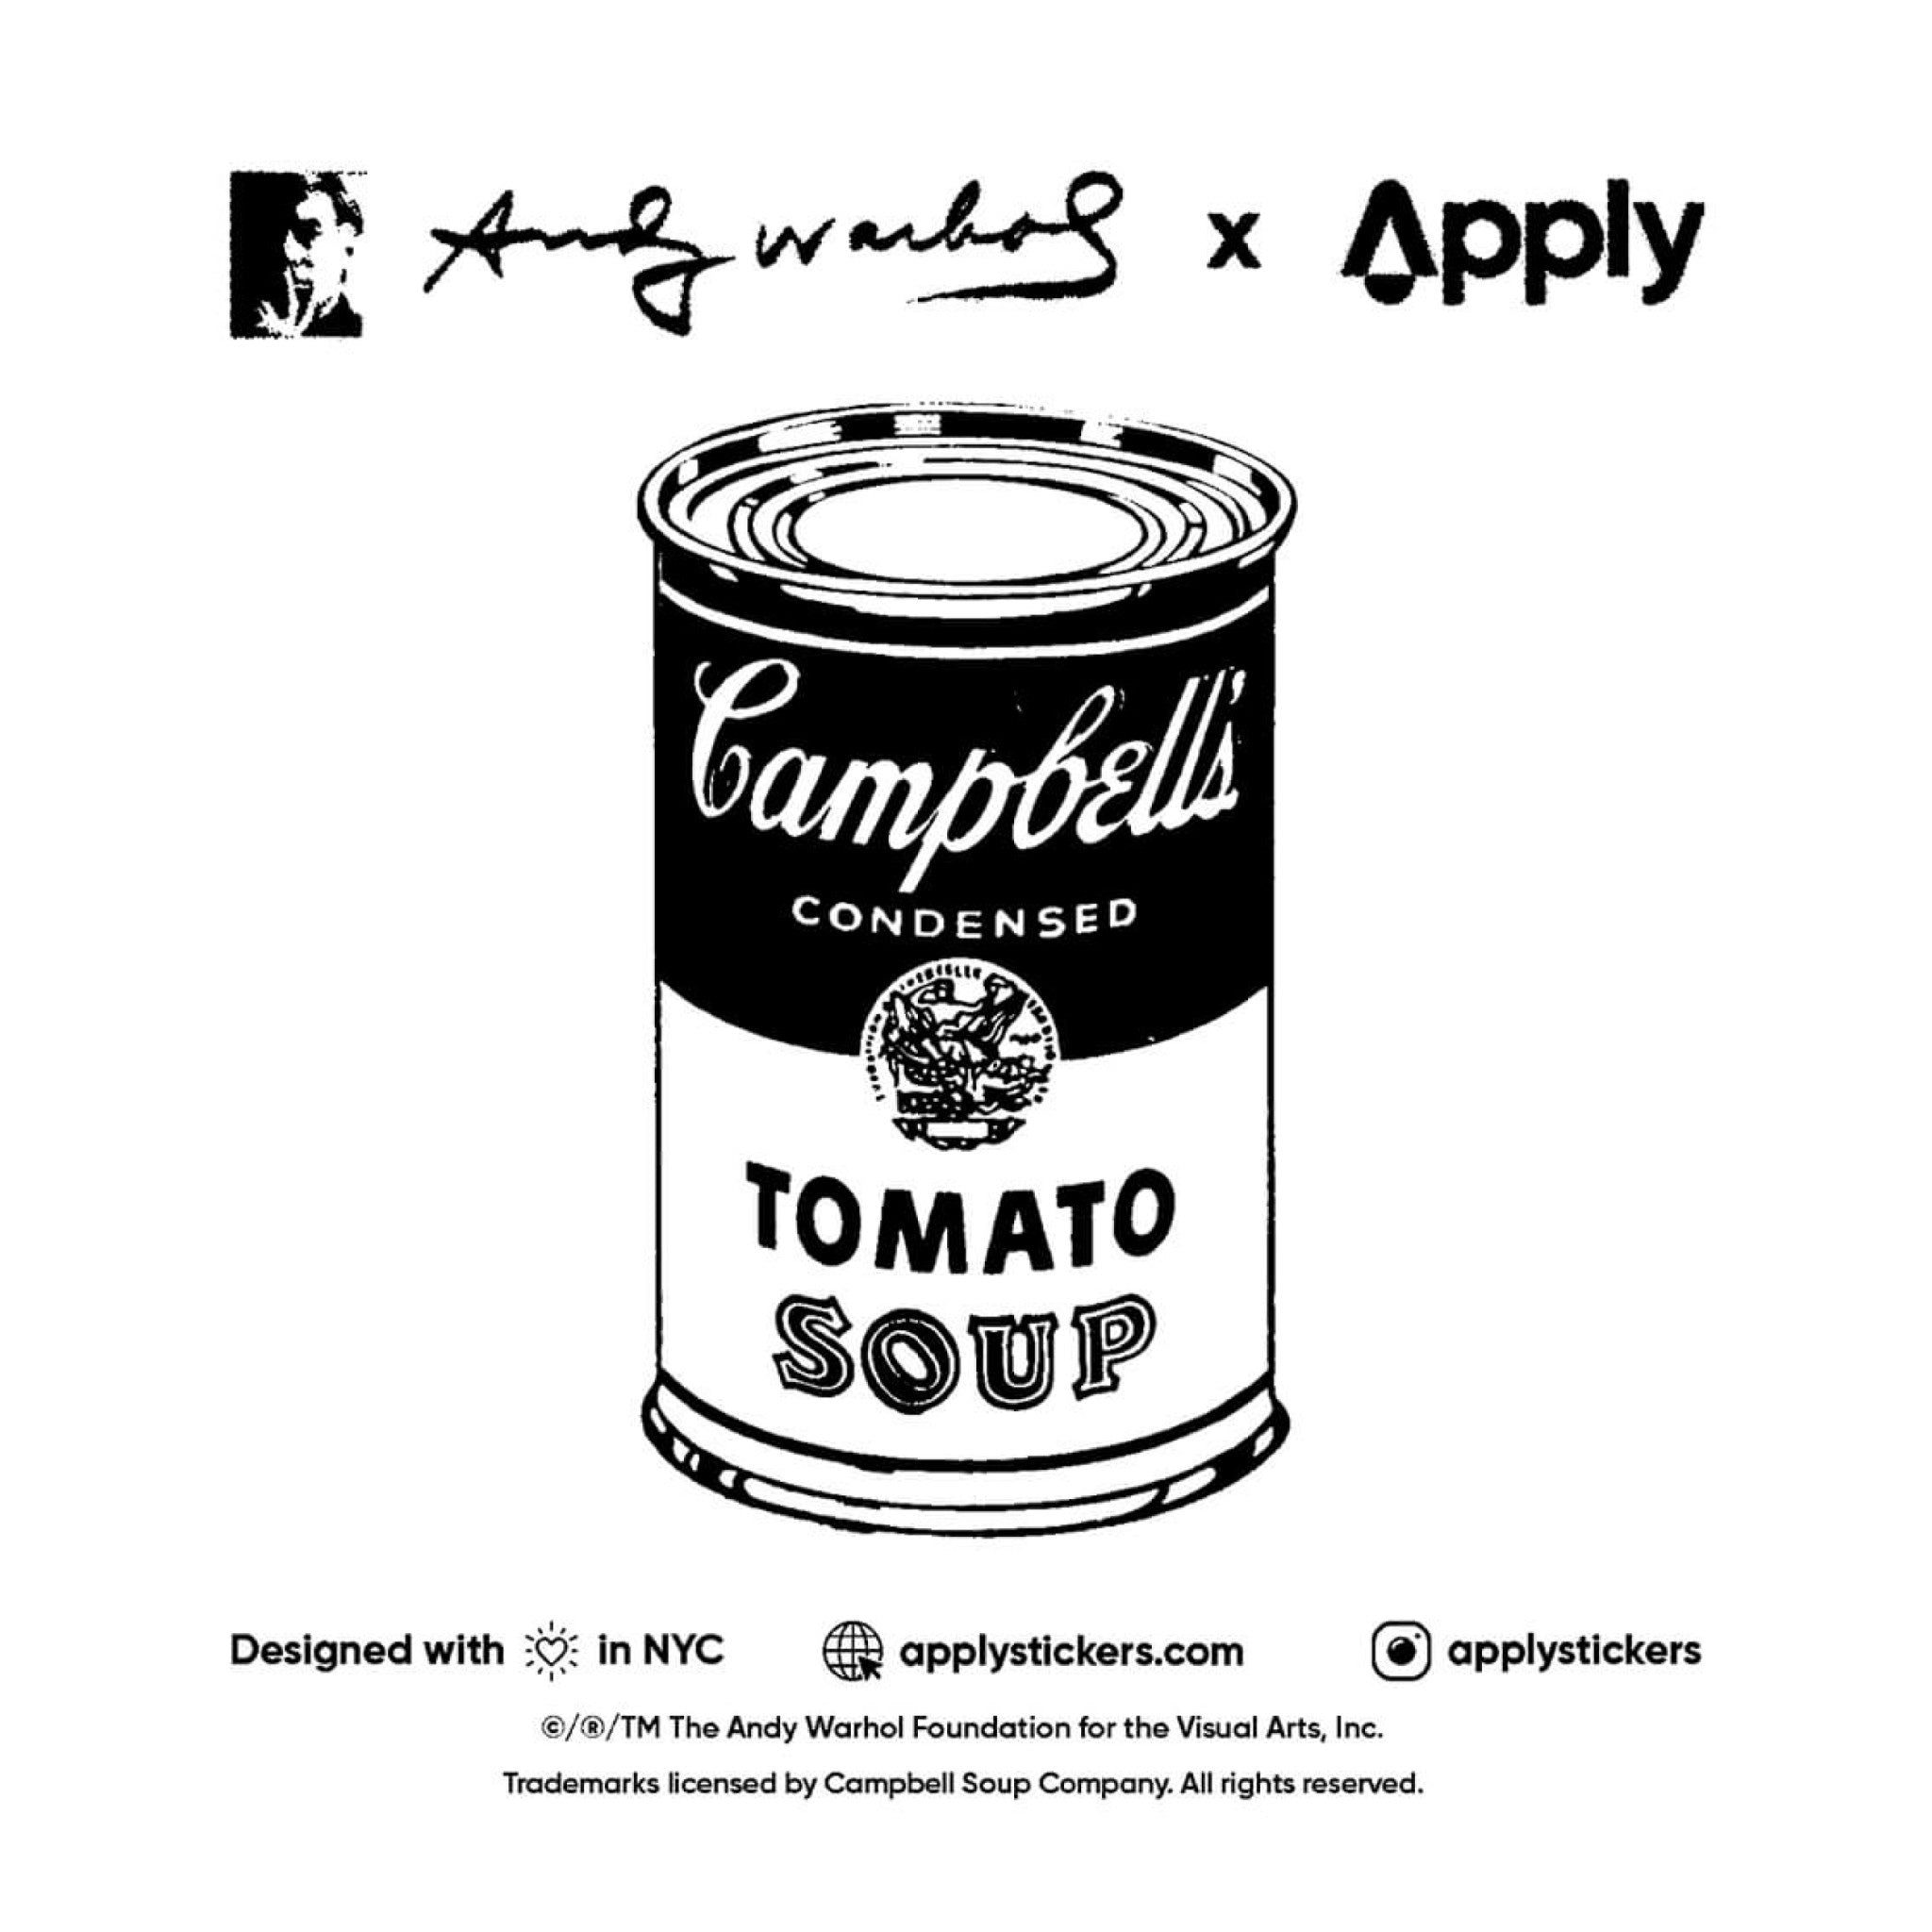 Apply Stickers - Campbell's Soup Cans Sticker Sheet 5 x 5 - Wynwood Walls Shop